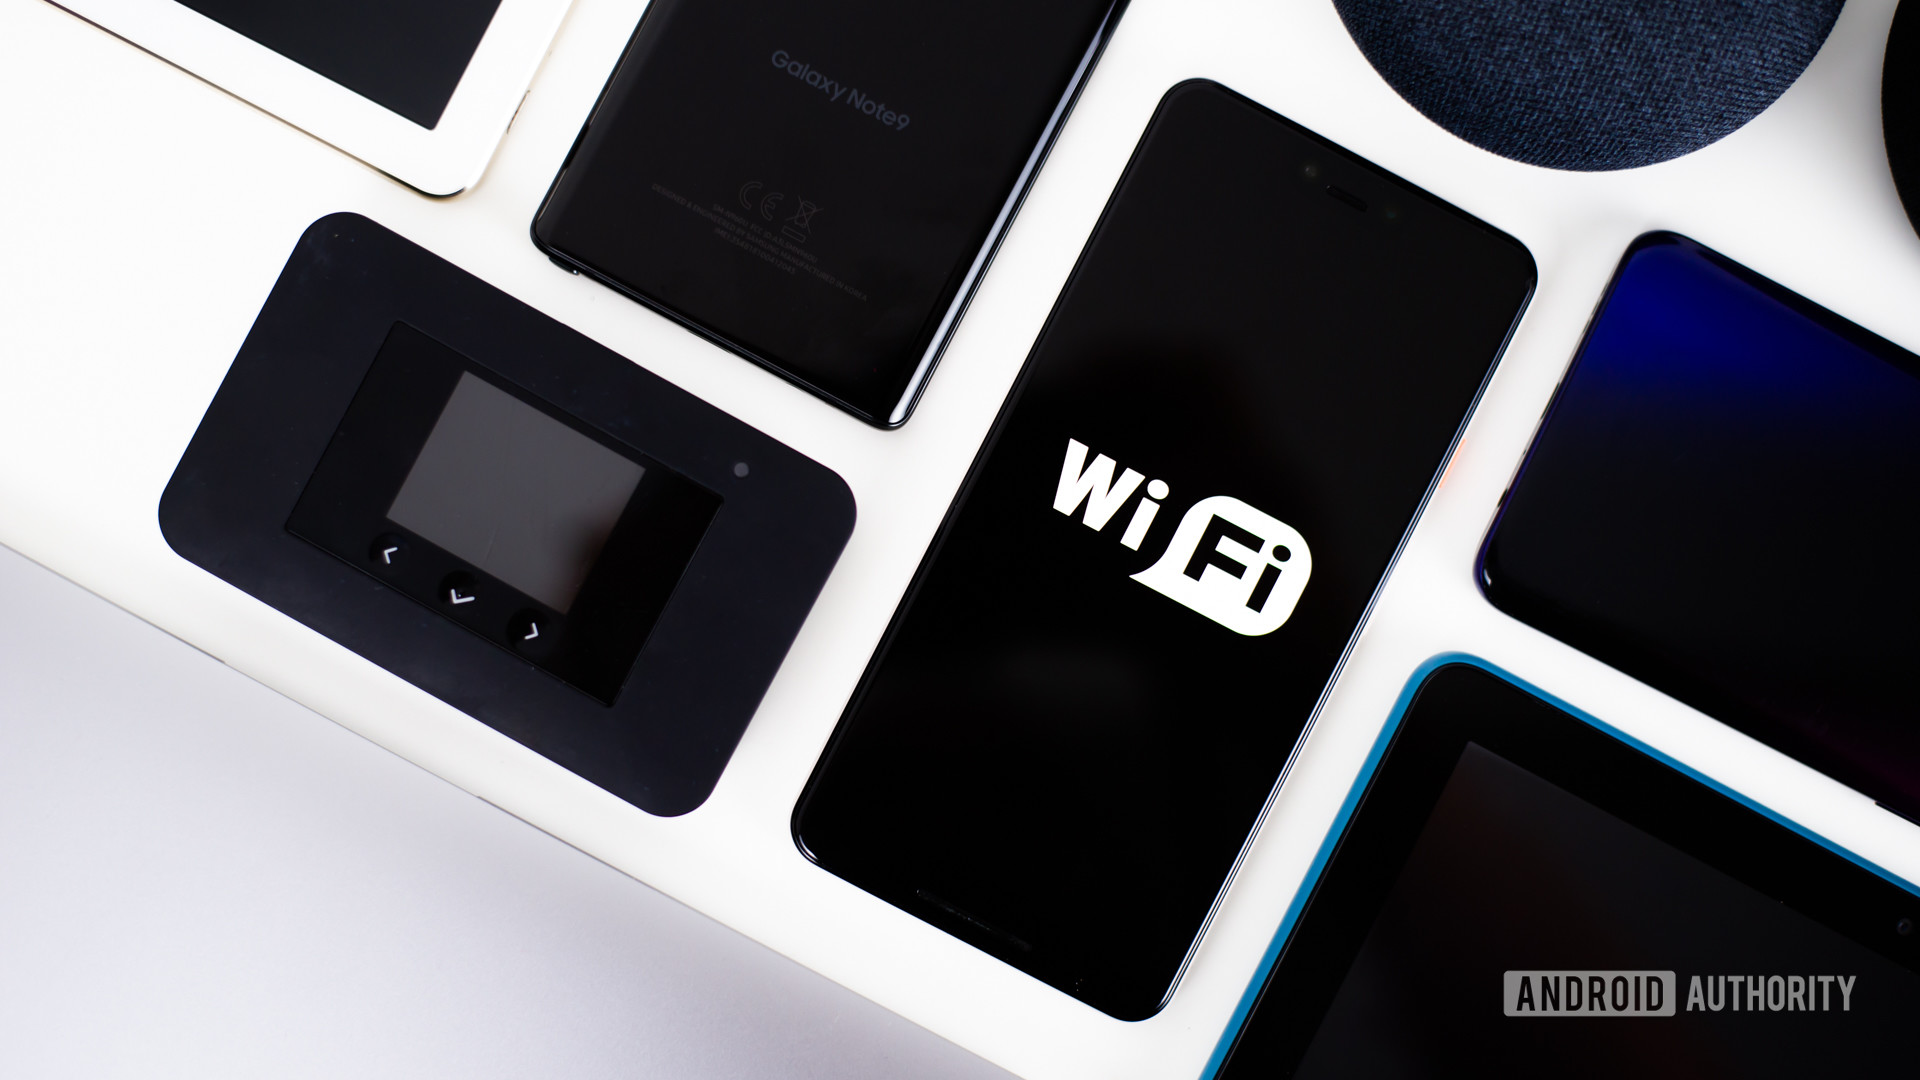 Wi Fi devices stock photo 2 - What to do when phone won't connect to Wi-Fi